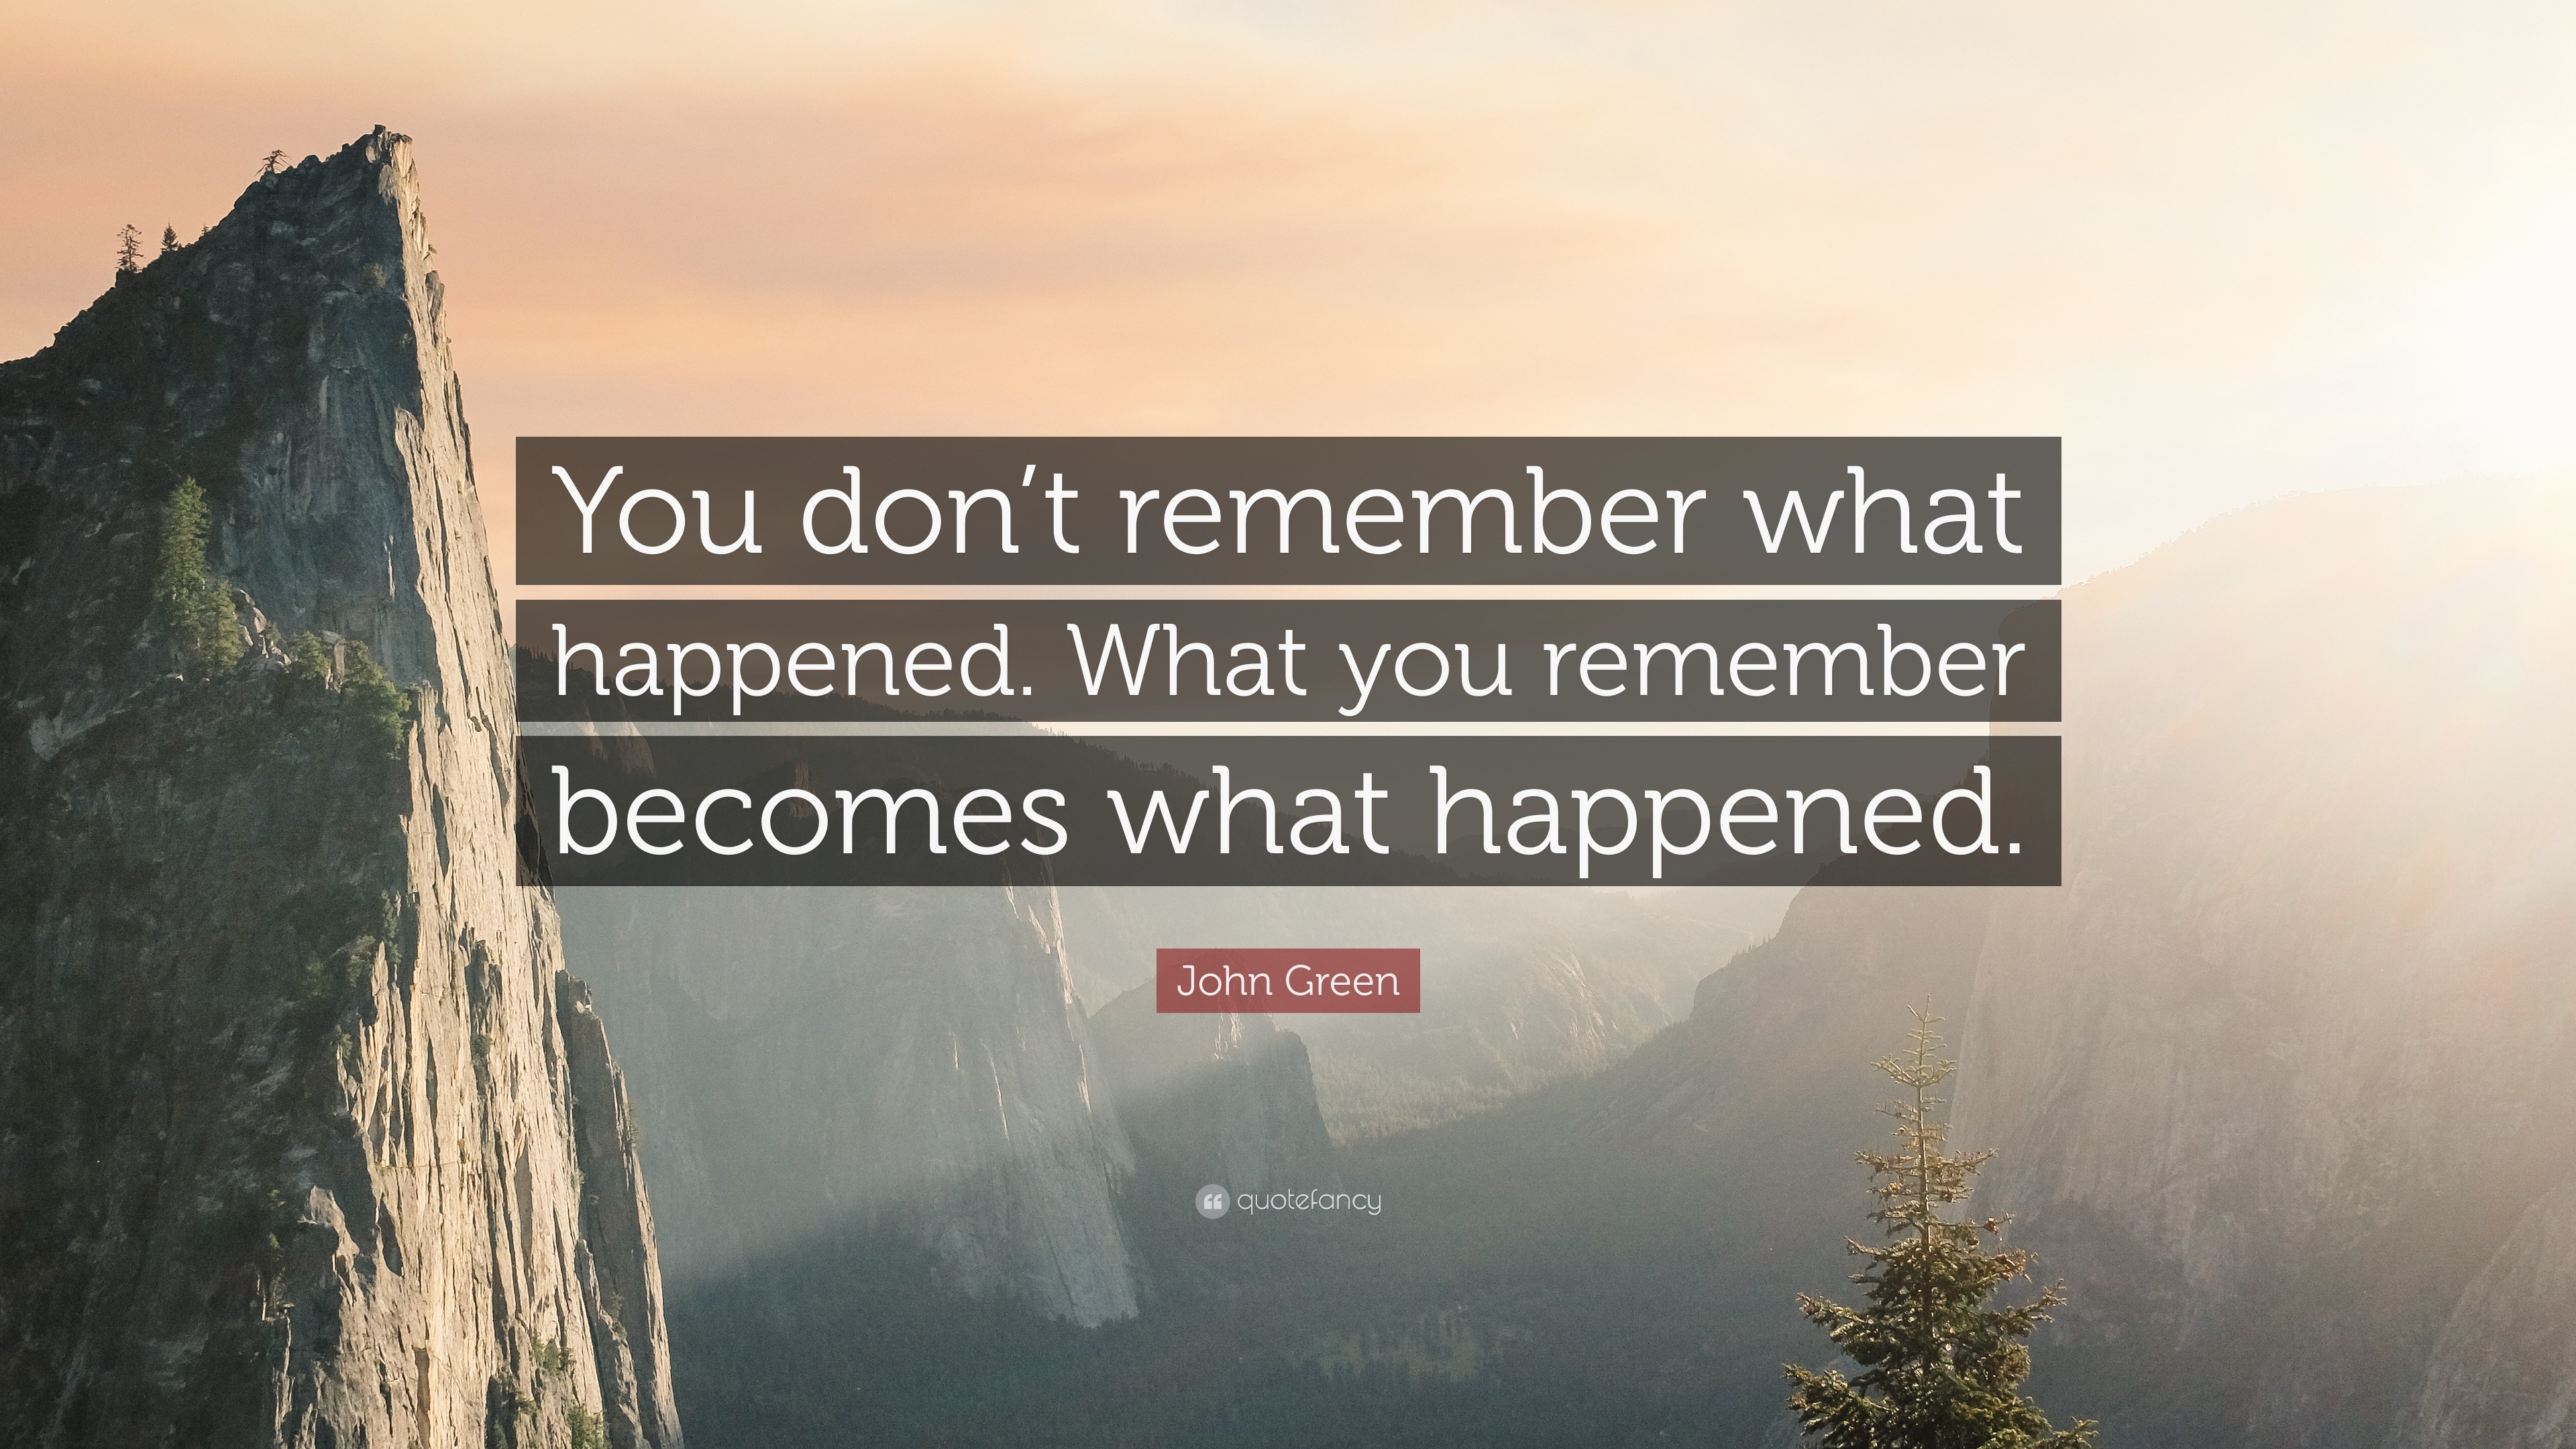 John Green Quote: “You don’t remember what happened. What you remember ...